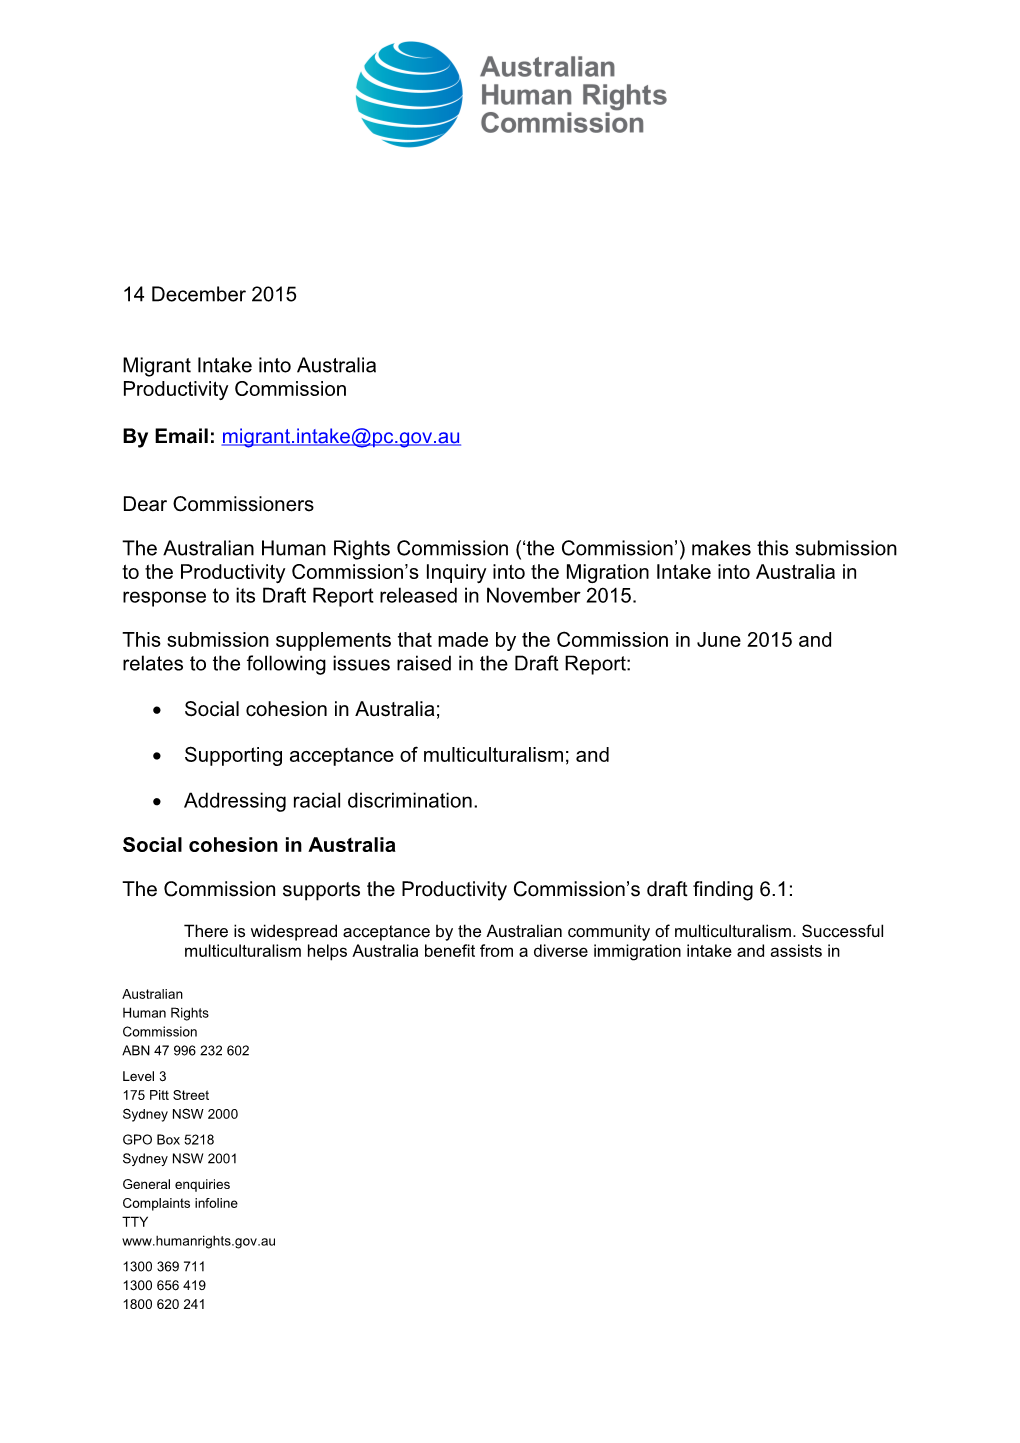 Submission DR90 - Australian Human Rights Commission - Migrant Intake Into Australia